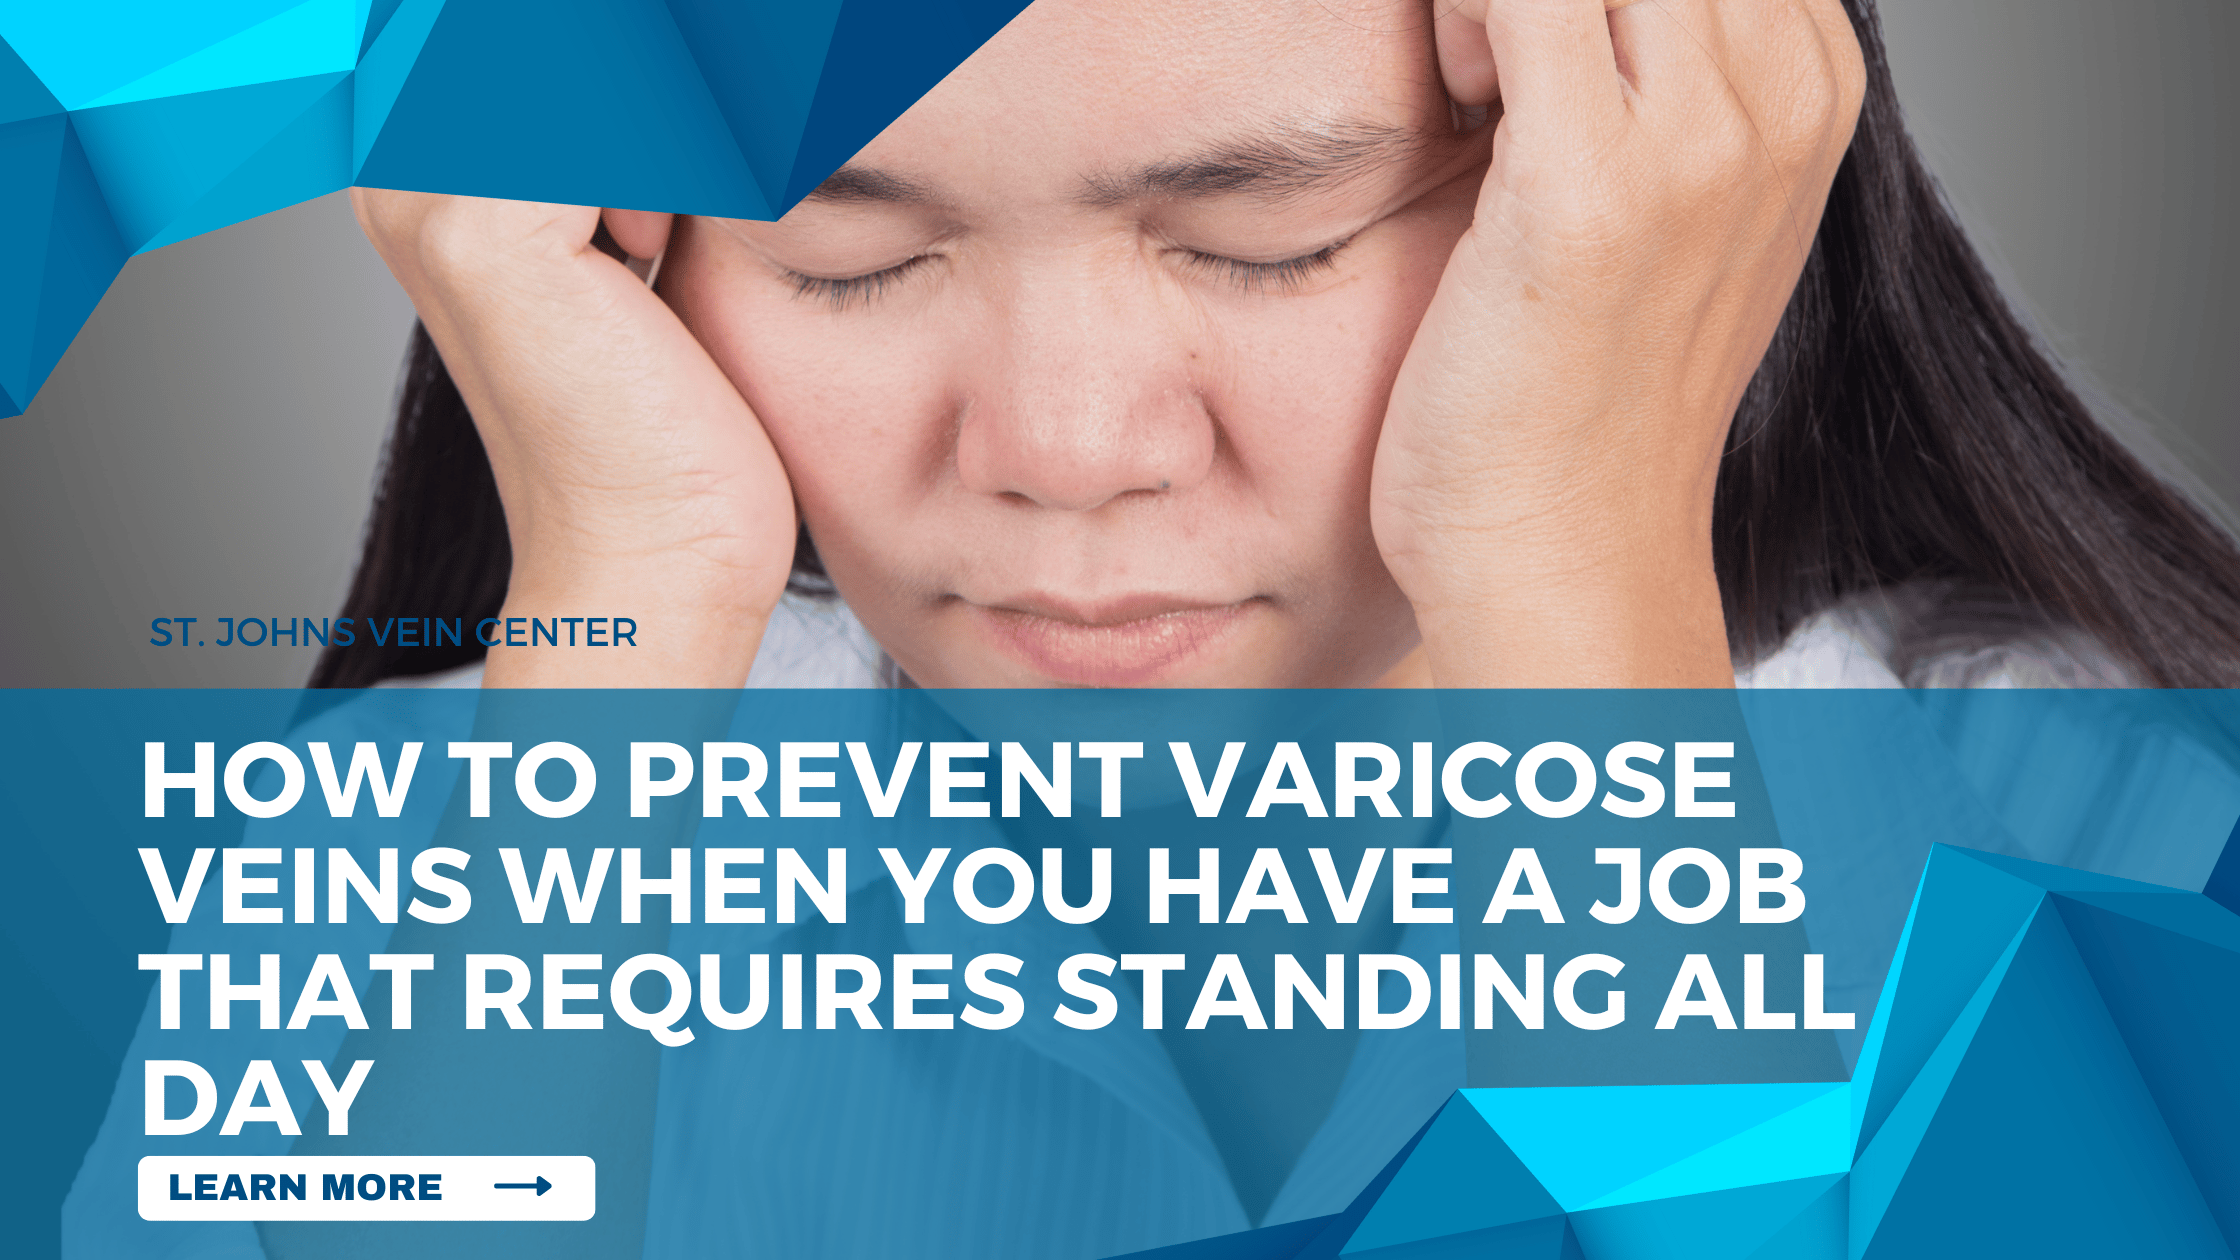 How To Prevent Varicose Veins When You Have A Job That Requires Standing All Day